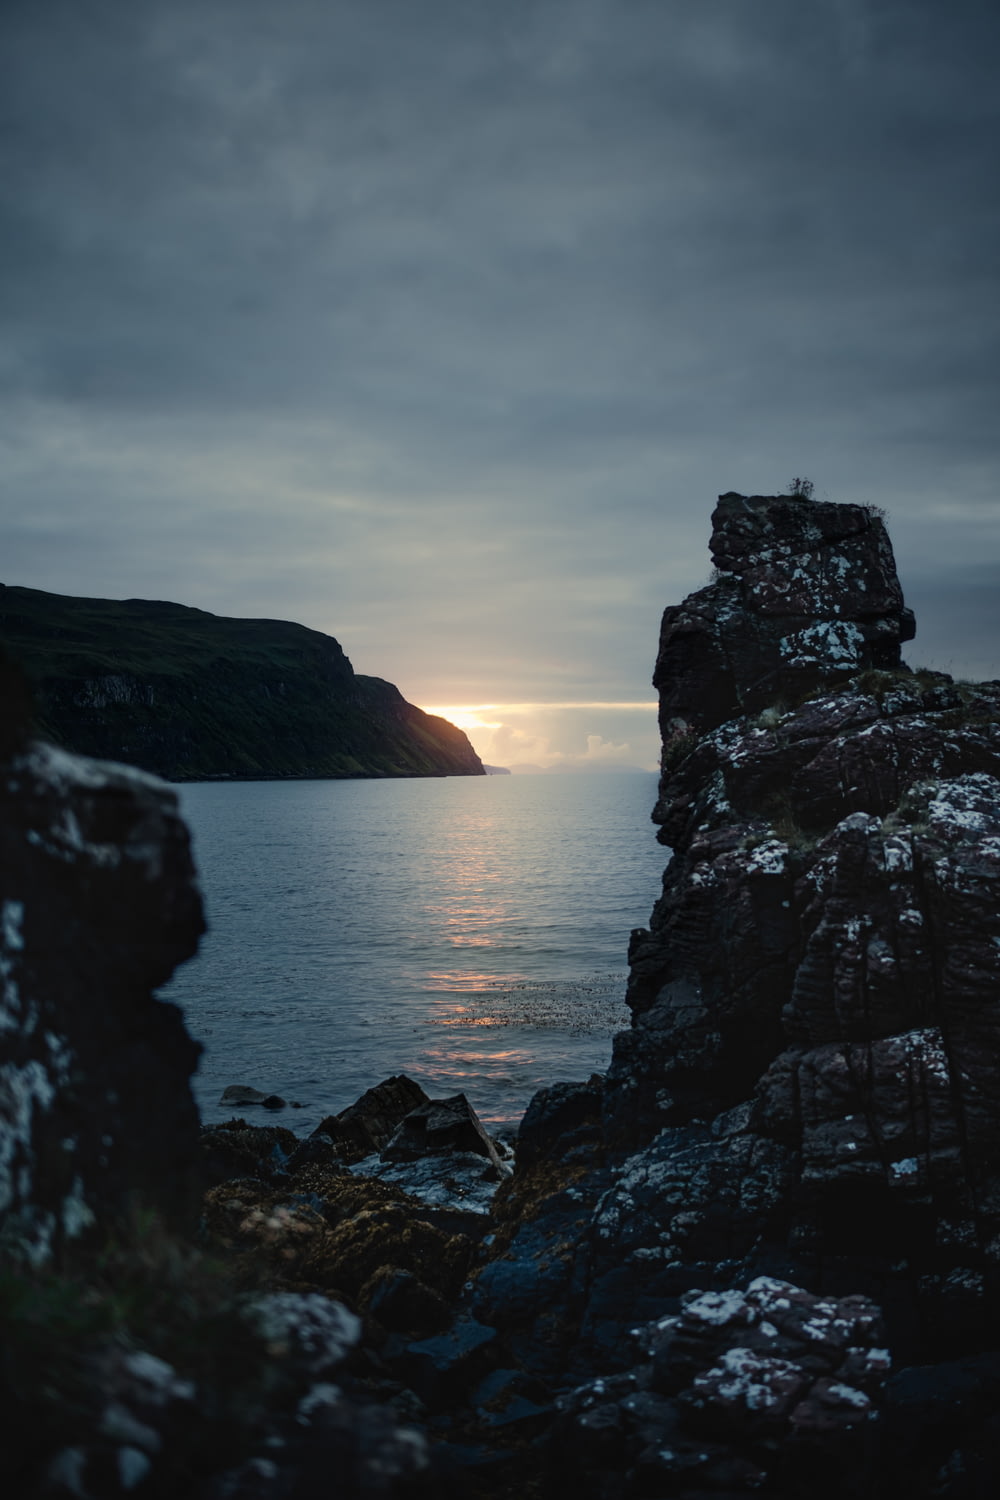 the sun is setting over the water from a rocky cliff